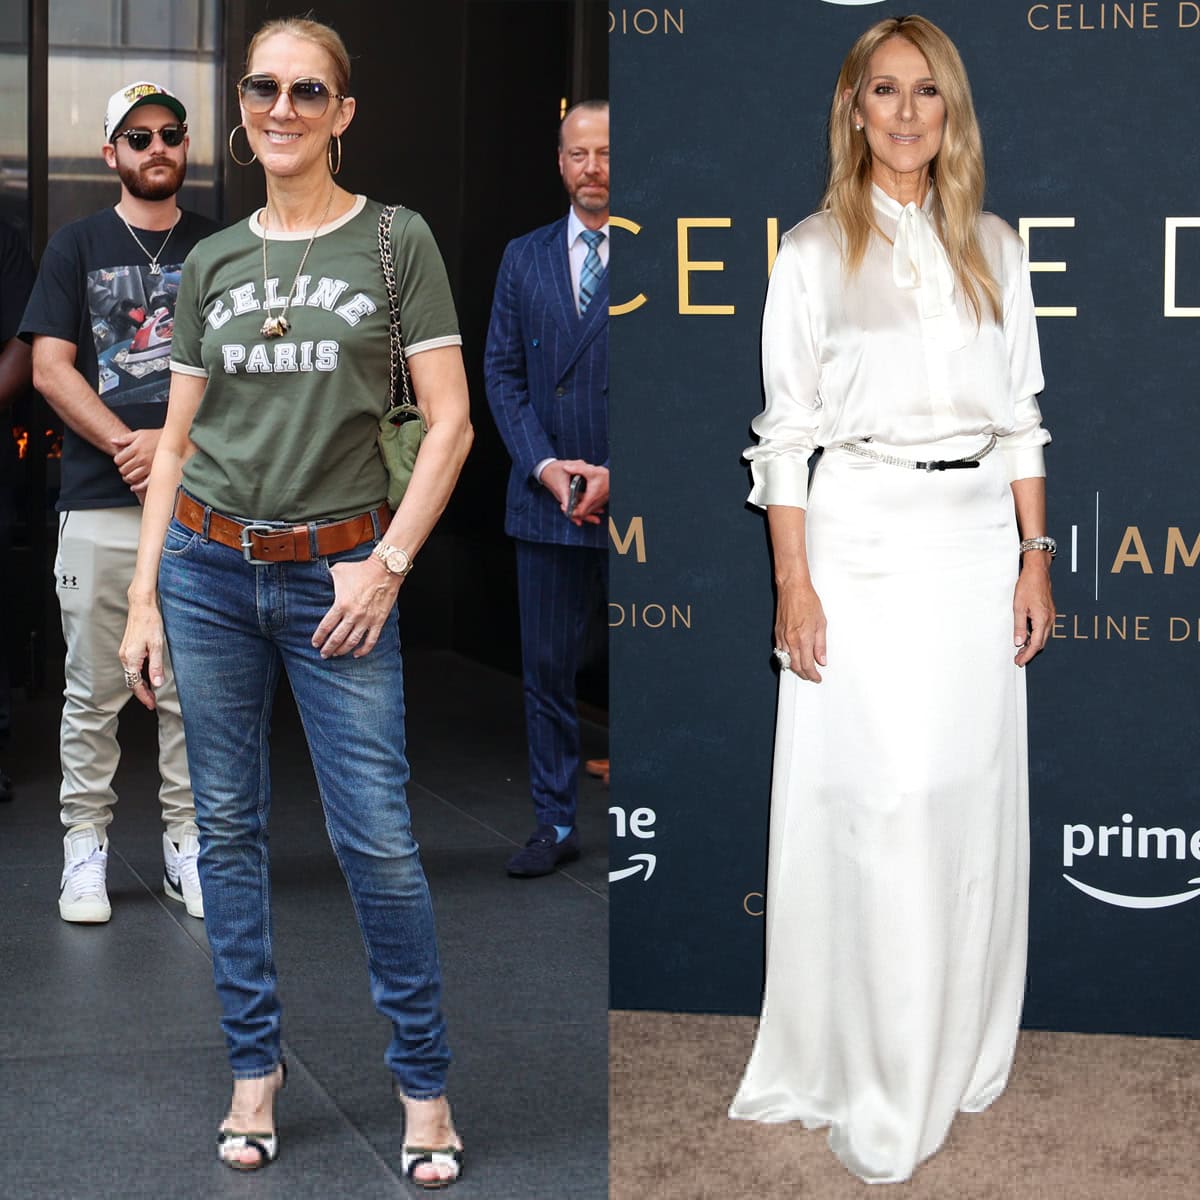 Celine Dion is back in the spotlight with her new documentary, I Am: Celine Dion, following her Stiff-Person Syndrome diagnosis in 2022